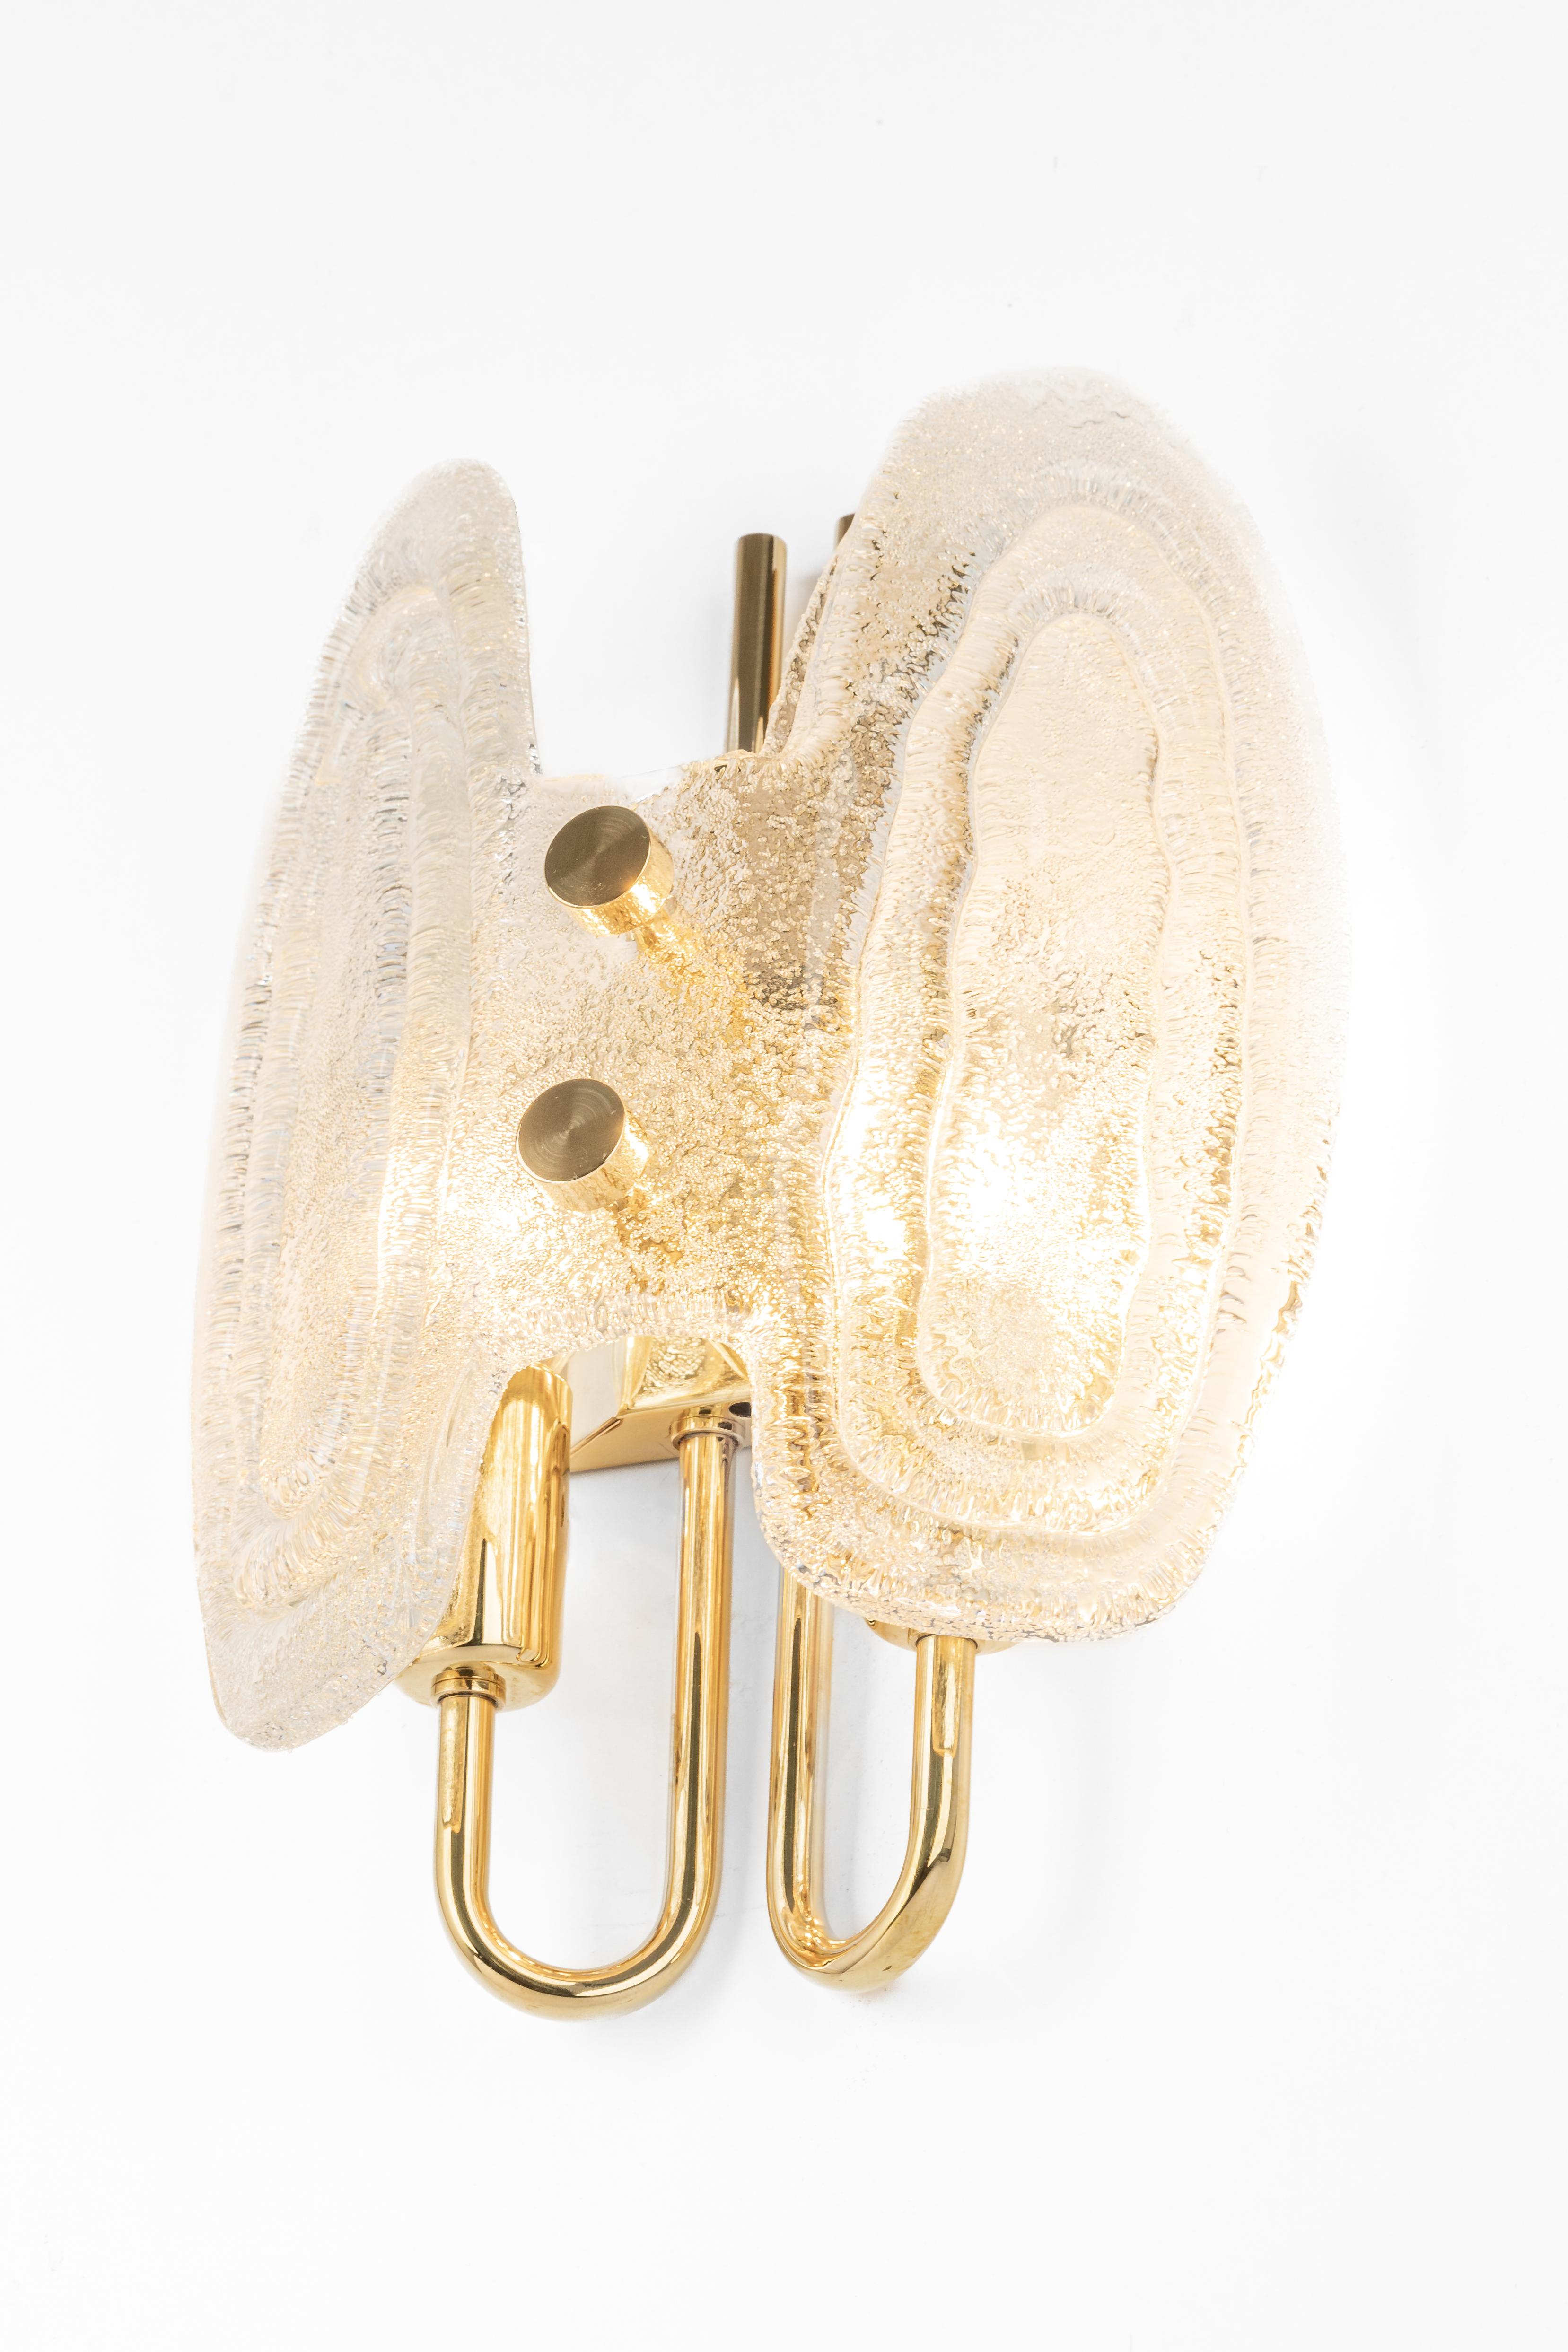 Pair of Murano Ice Glass Brass Sconces by Hillebrand, Germany, 1970s For Sale 2